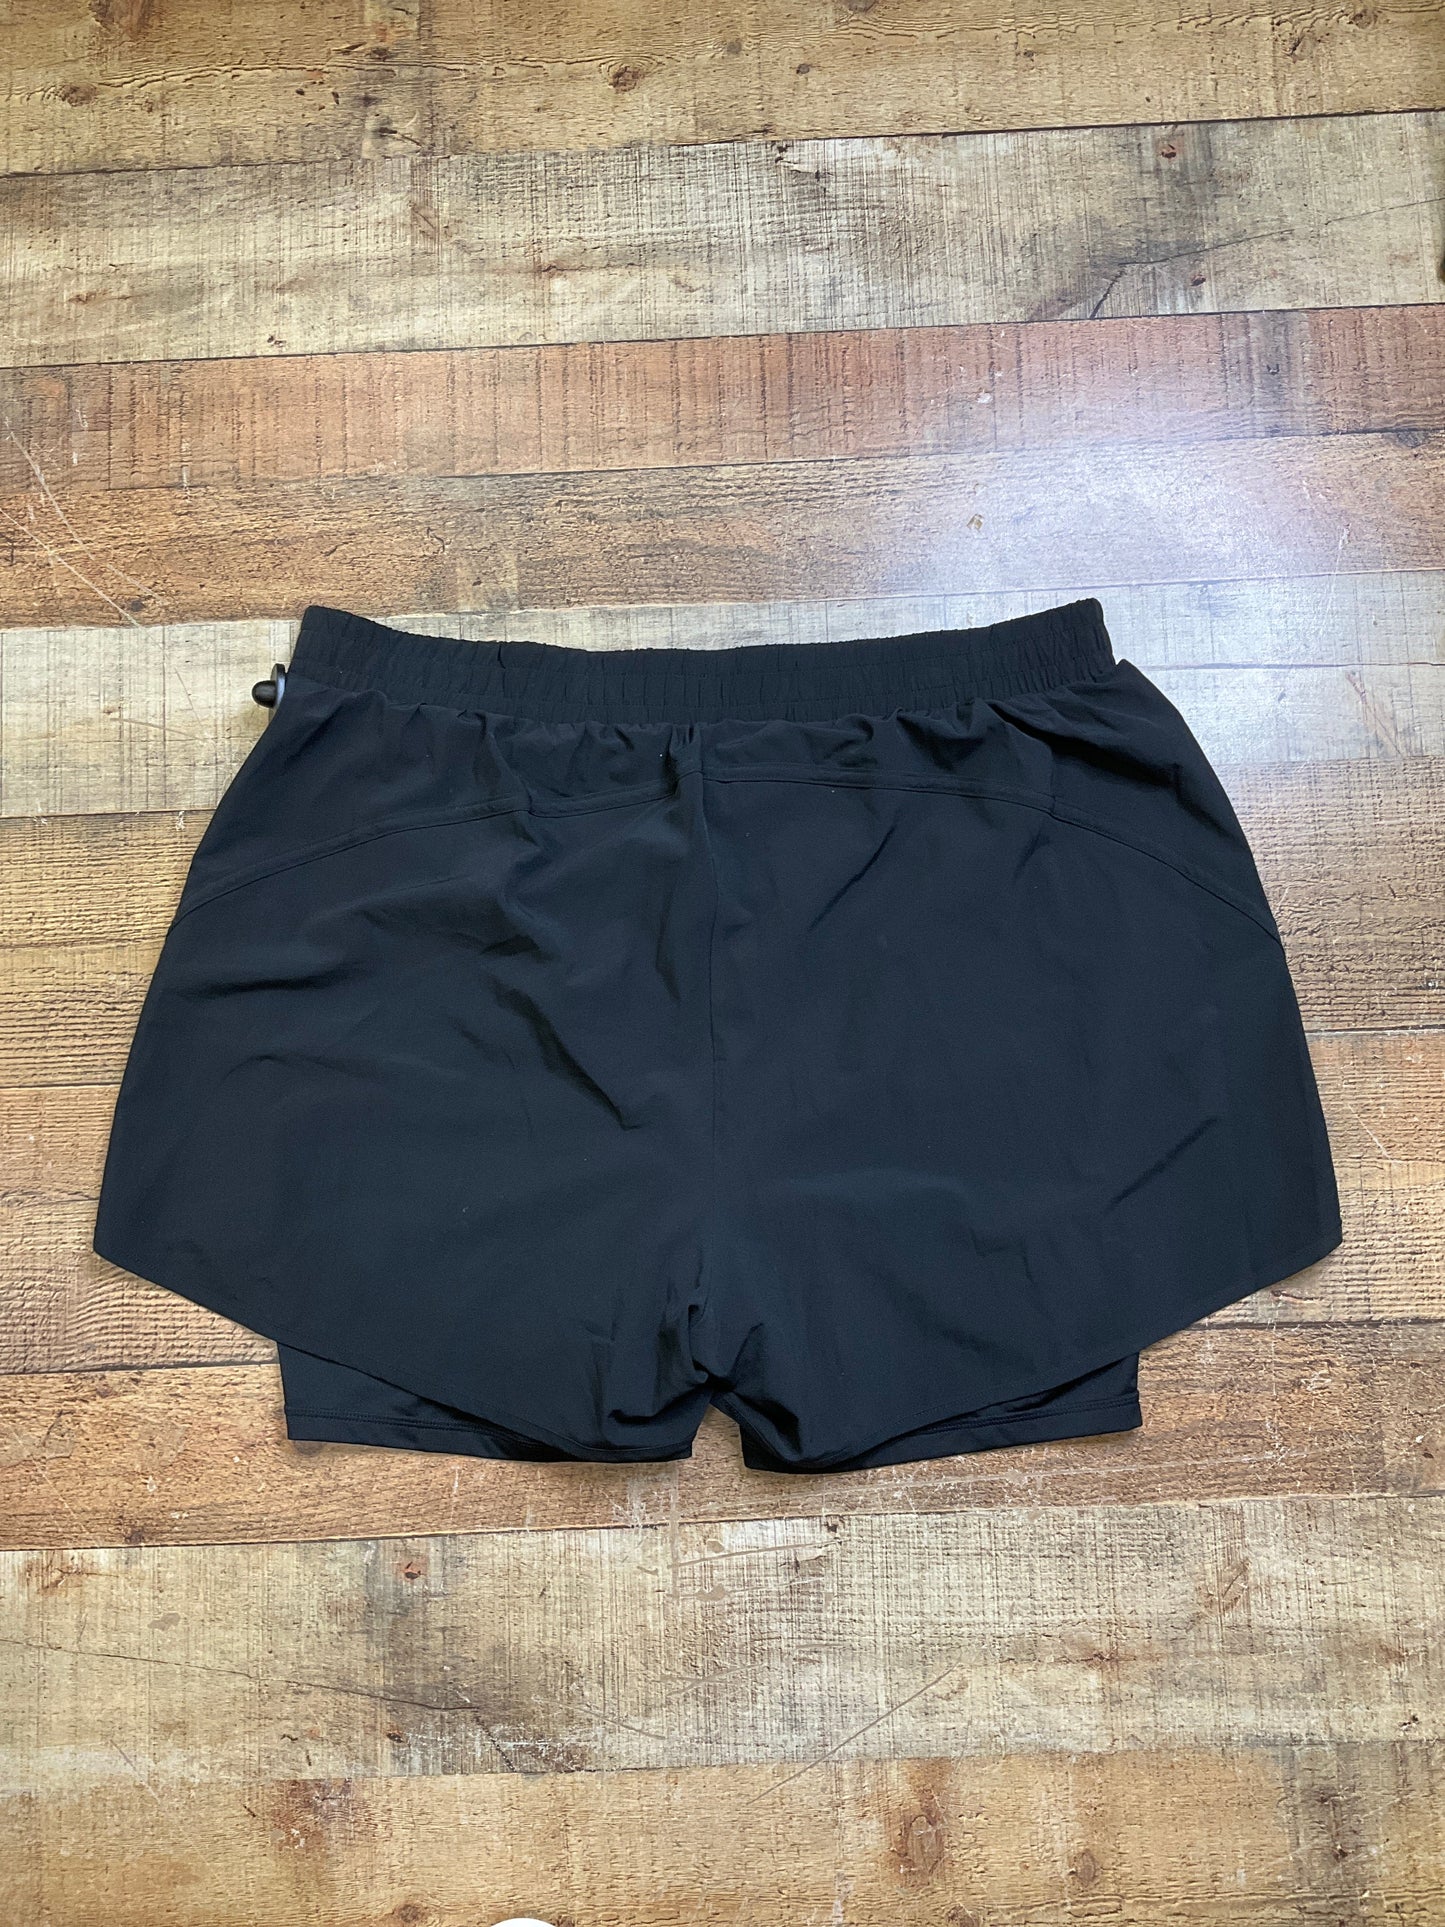 Athletic Shorts By Ideology  Size: 2x